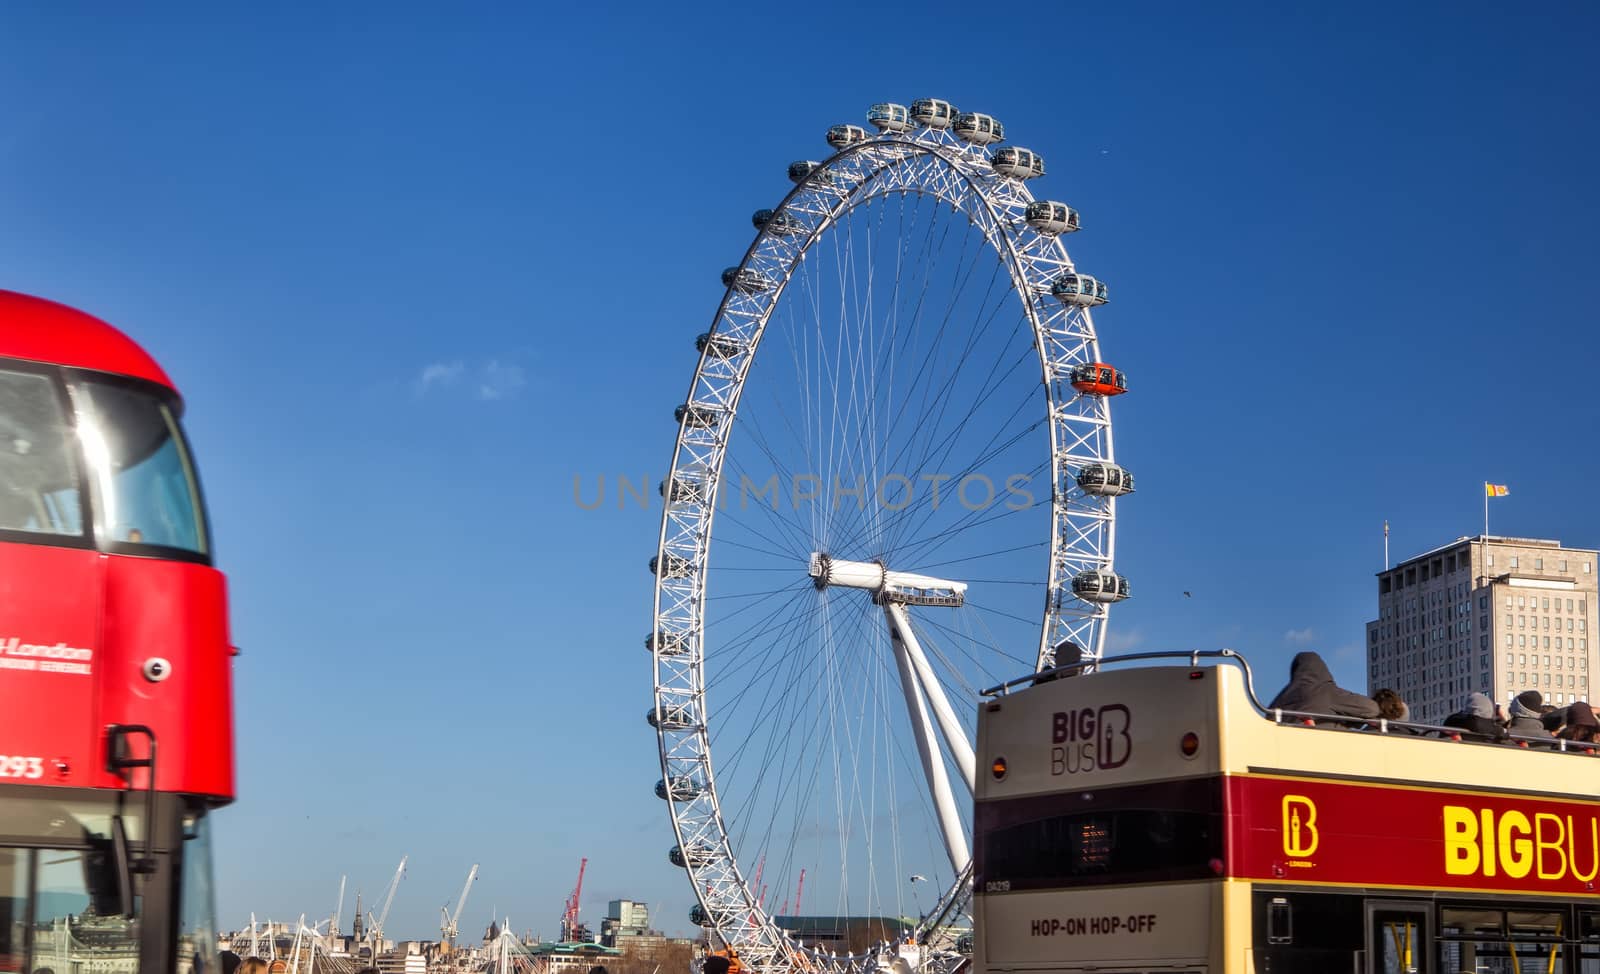 The London Eye and iconic red bus by mitakag